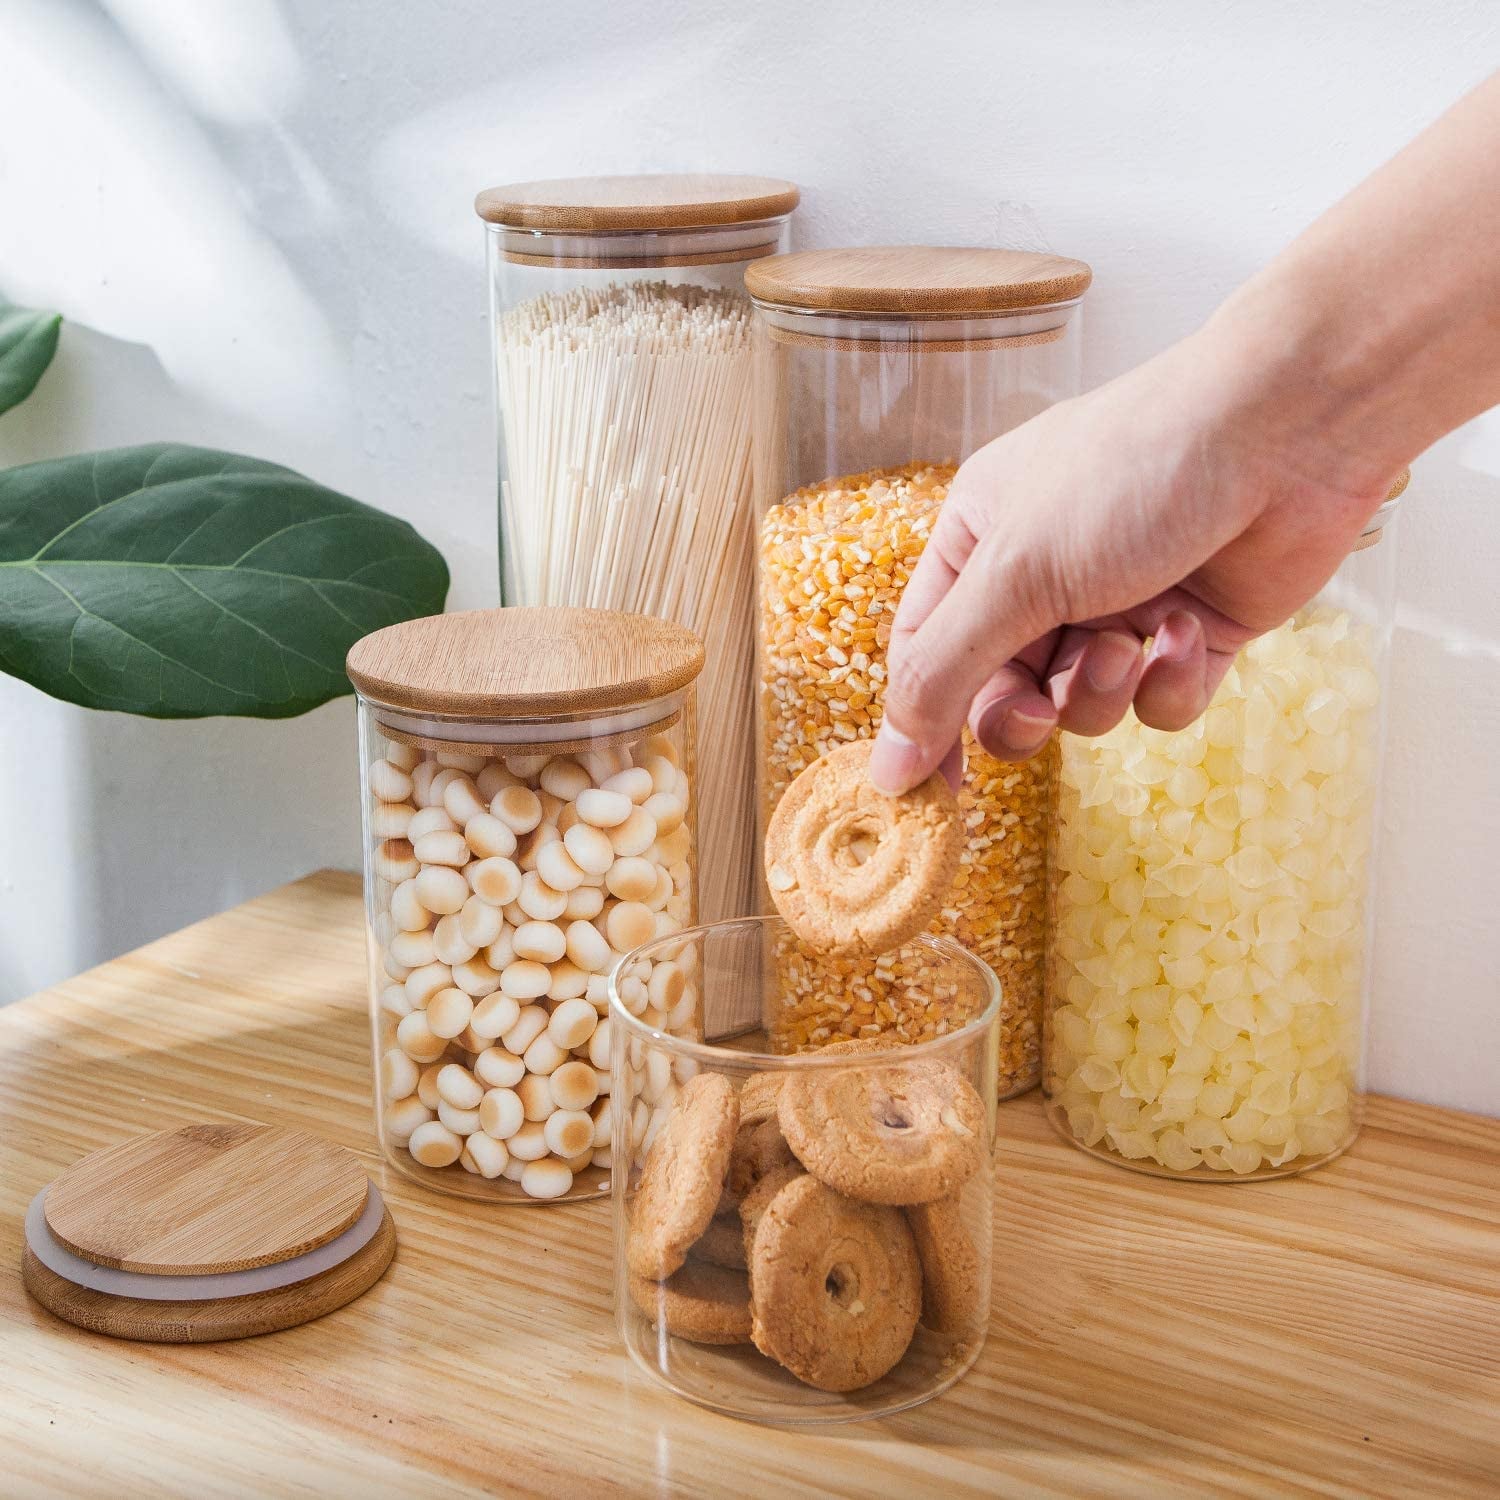 The 10 Best Ways to Organize Food Storage Containers of 2023